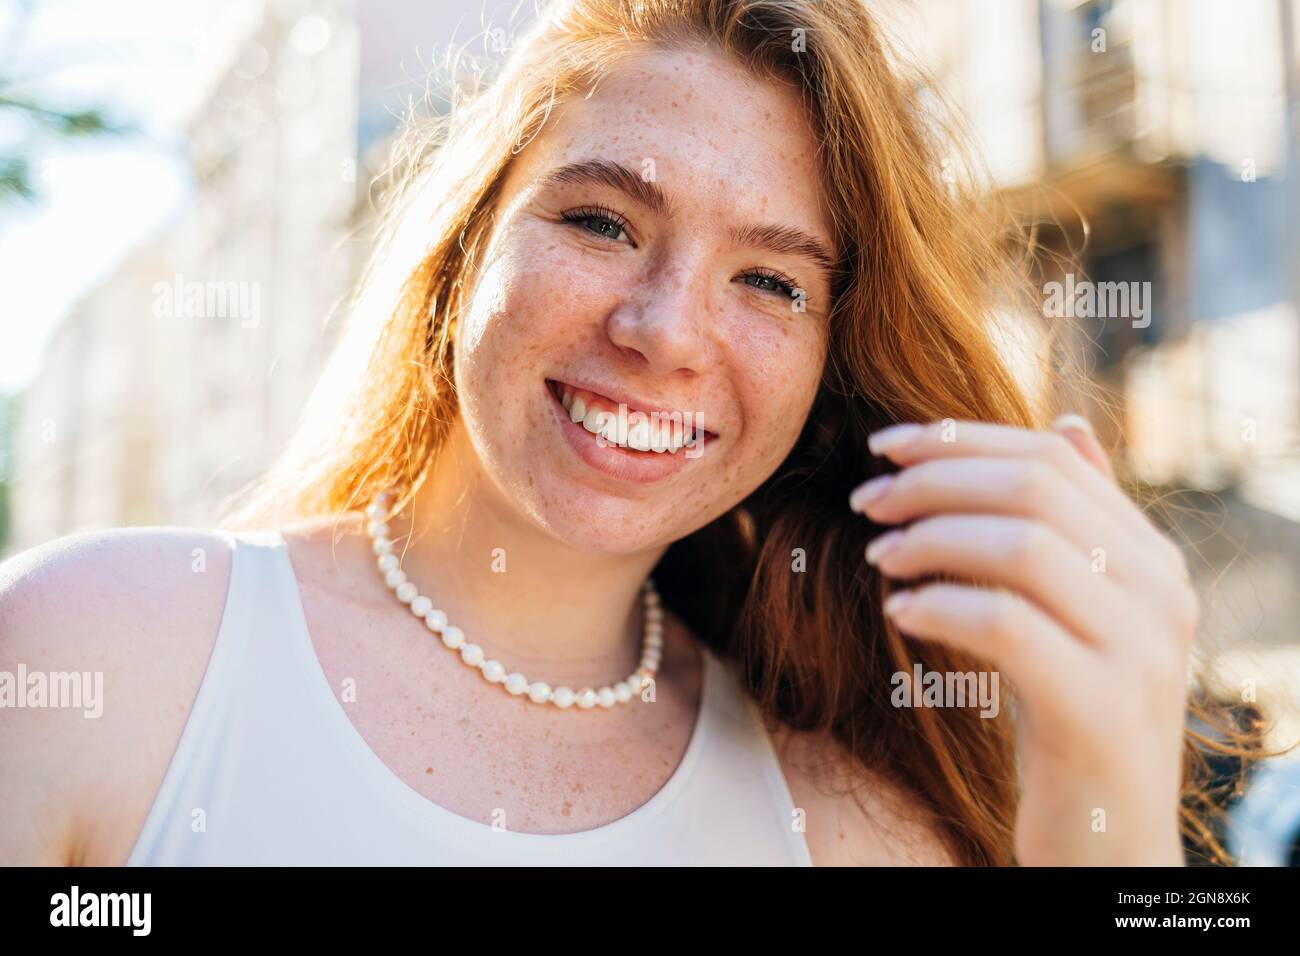 Happy young woman with freckles wearing pearl necklace Stock Photo